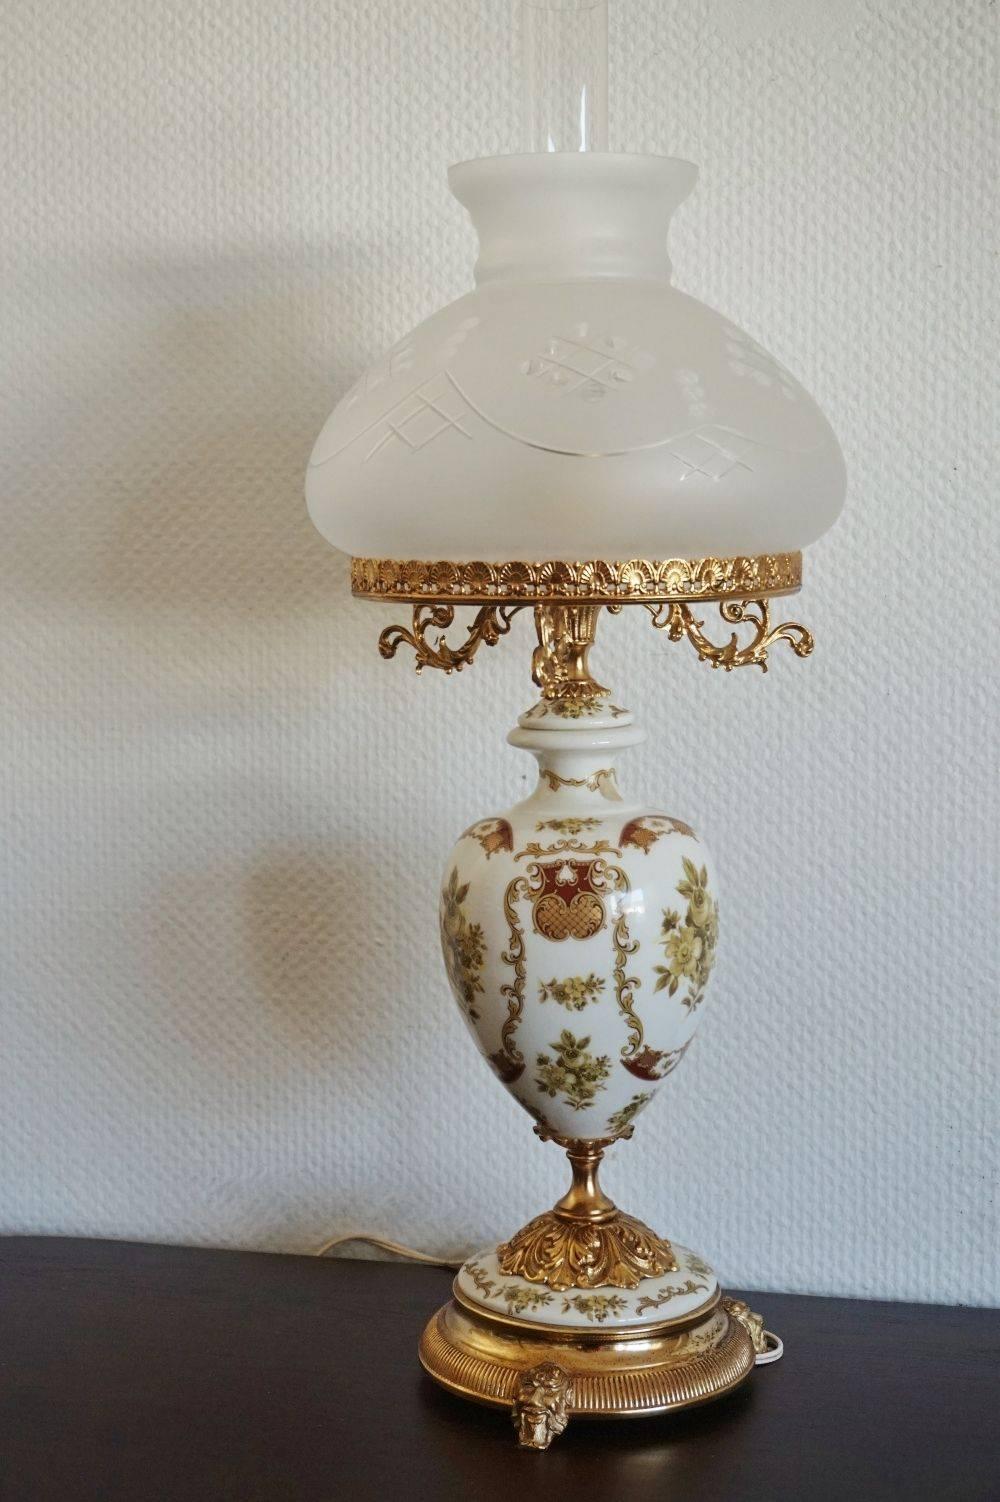 Large Italian hand-painted porcelain and brass vase table lamp with cut frosted glass shade and clear glass chimney, circa 1960.
Very good condition, no chips or cracks, brass with patina of age.

Measures: Total height 28.50 in (72.5 cm)